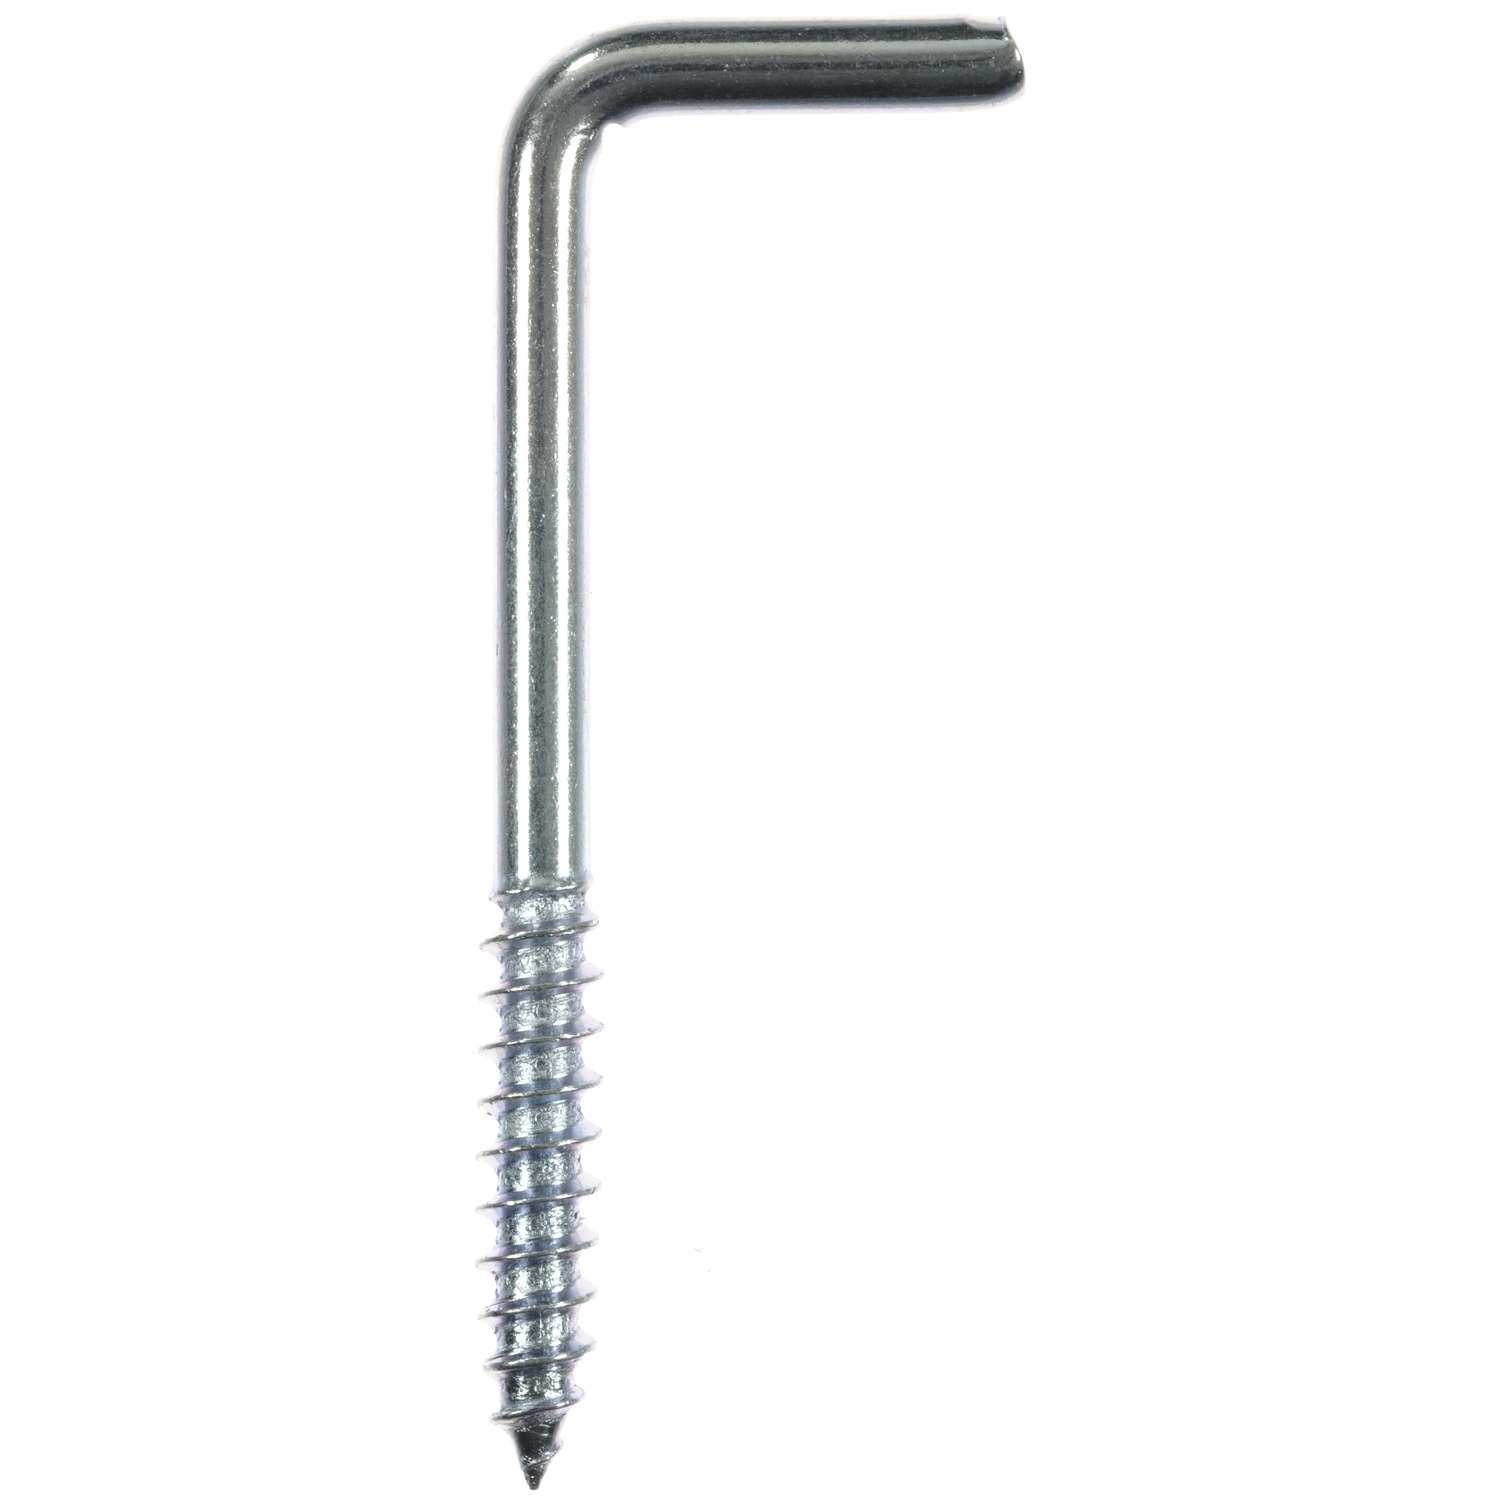 Ace Small Zinc-Plated Silver Steel 2.375 in. L Square Bend Screw Hook 25 lb  pk Ace Hardware